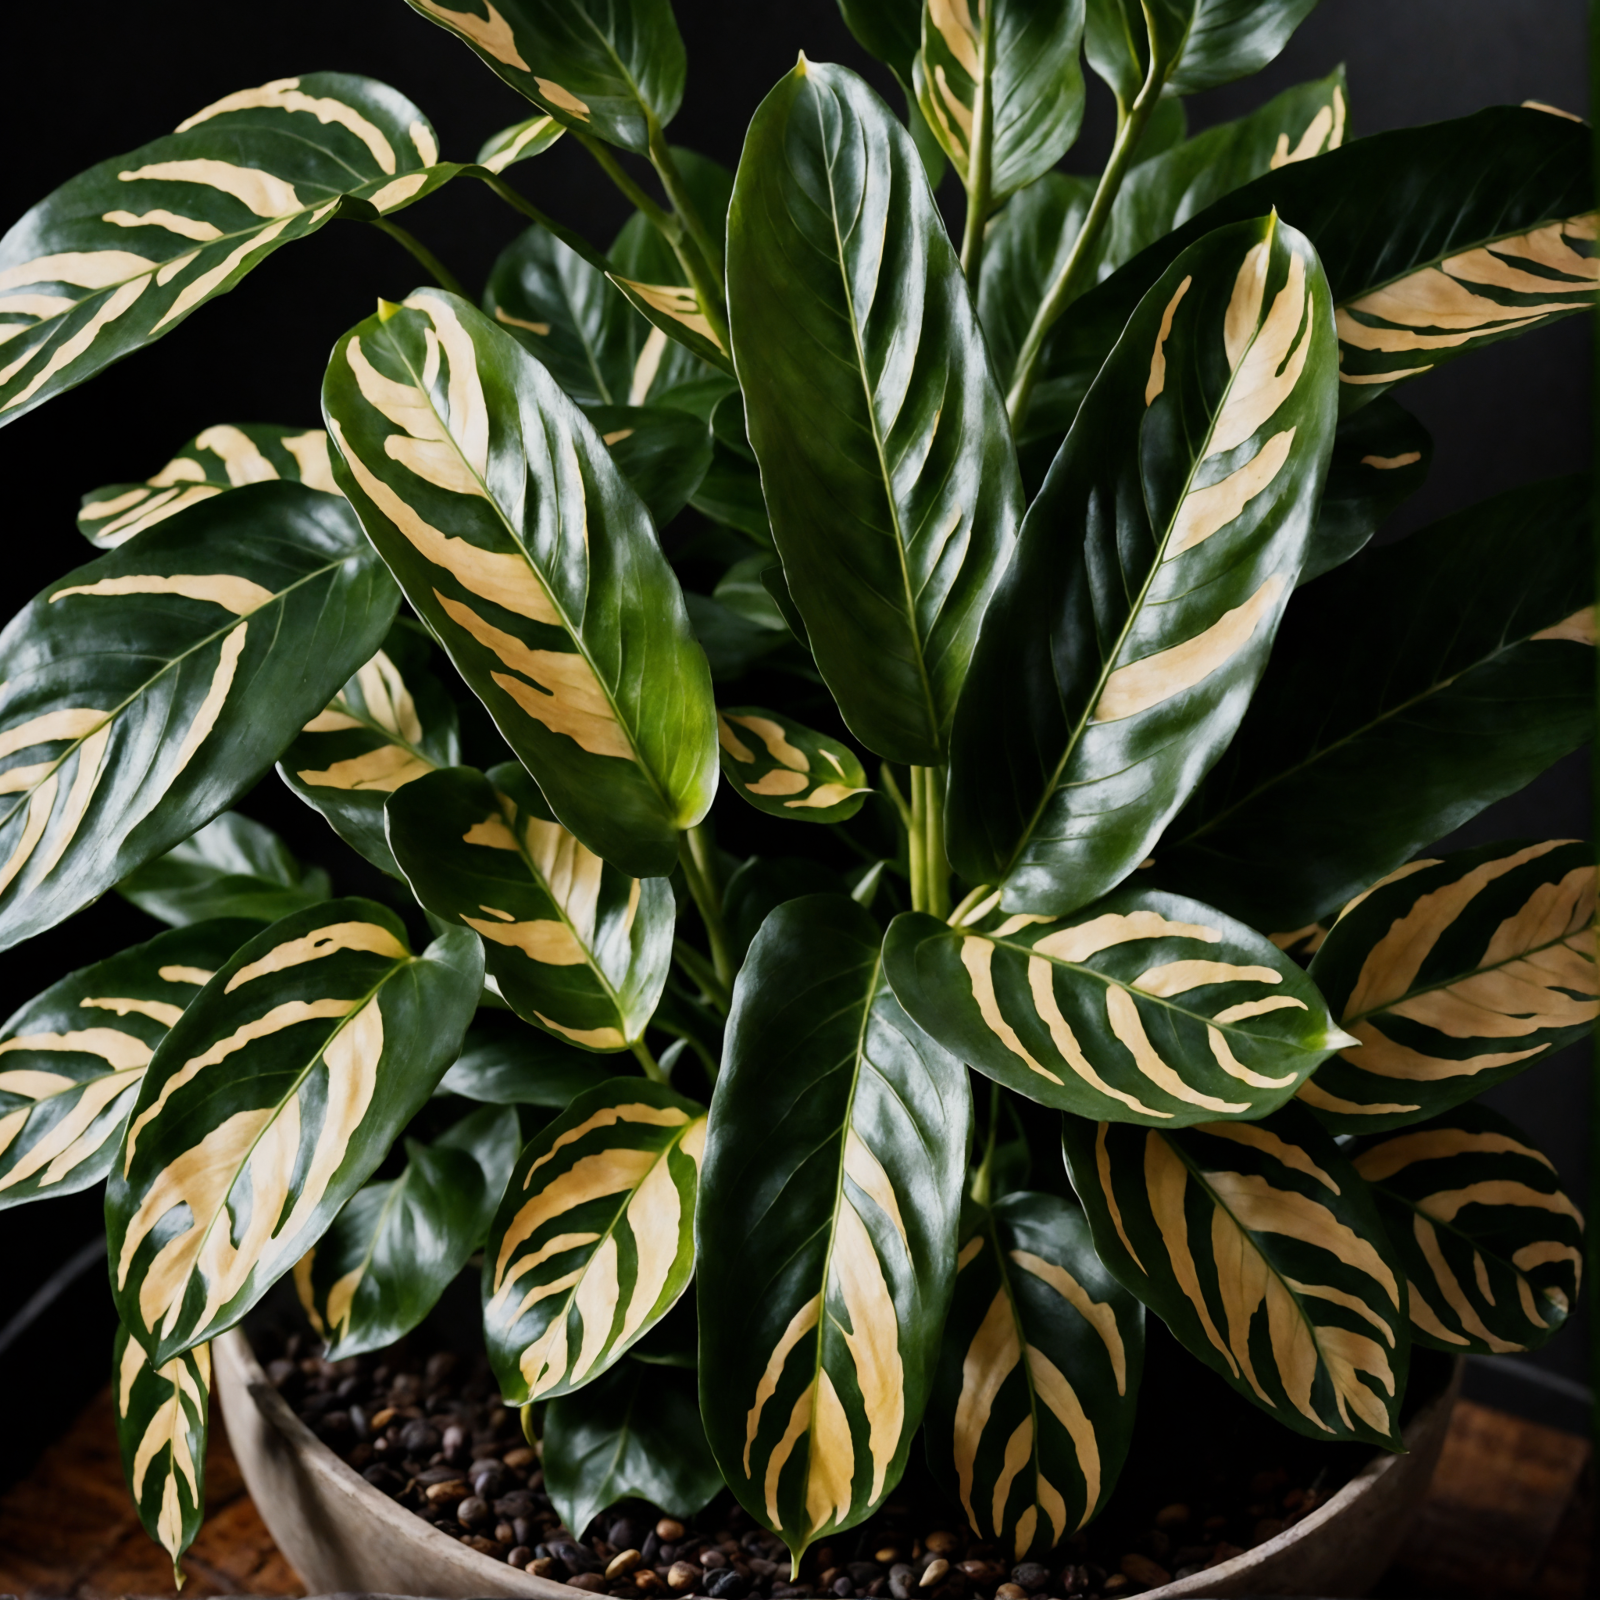 Ctenanthe lubbersiana with variegated leaves in a bowl planter, against a dark background with clear lighting.